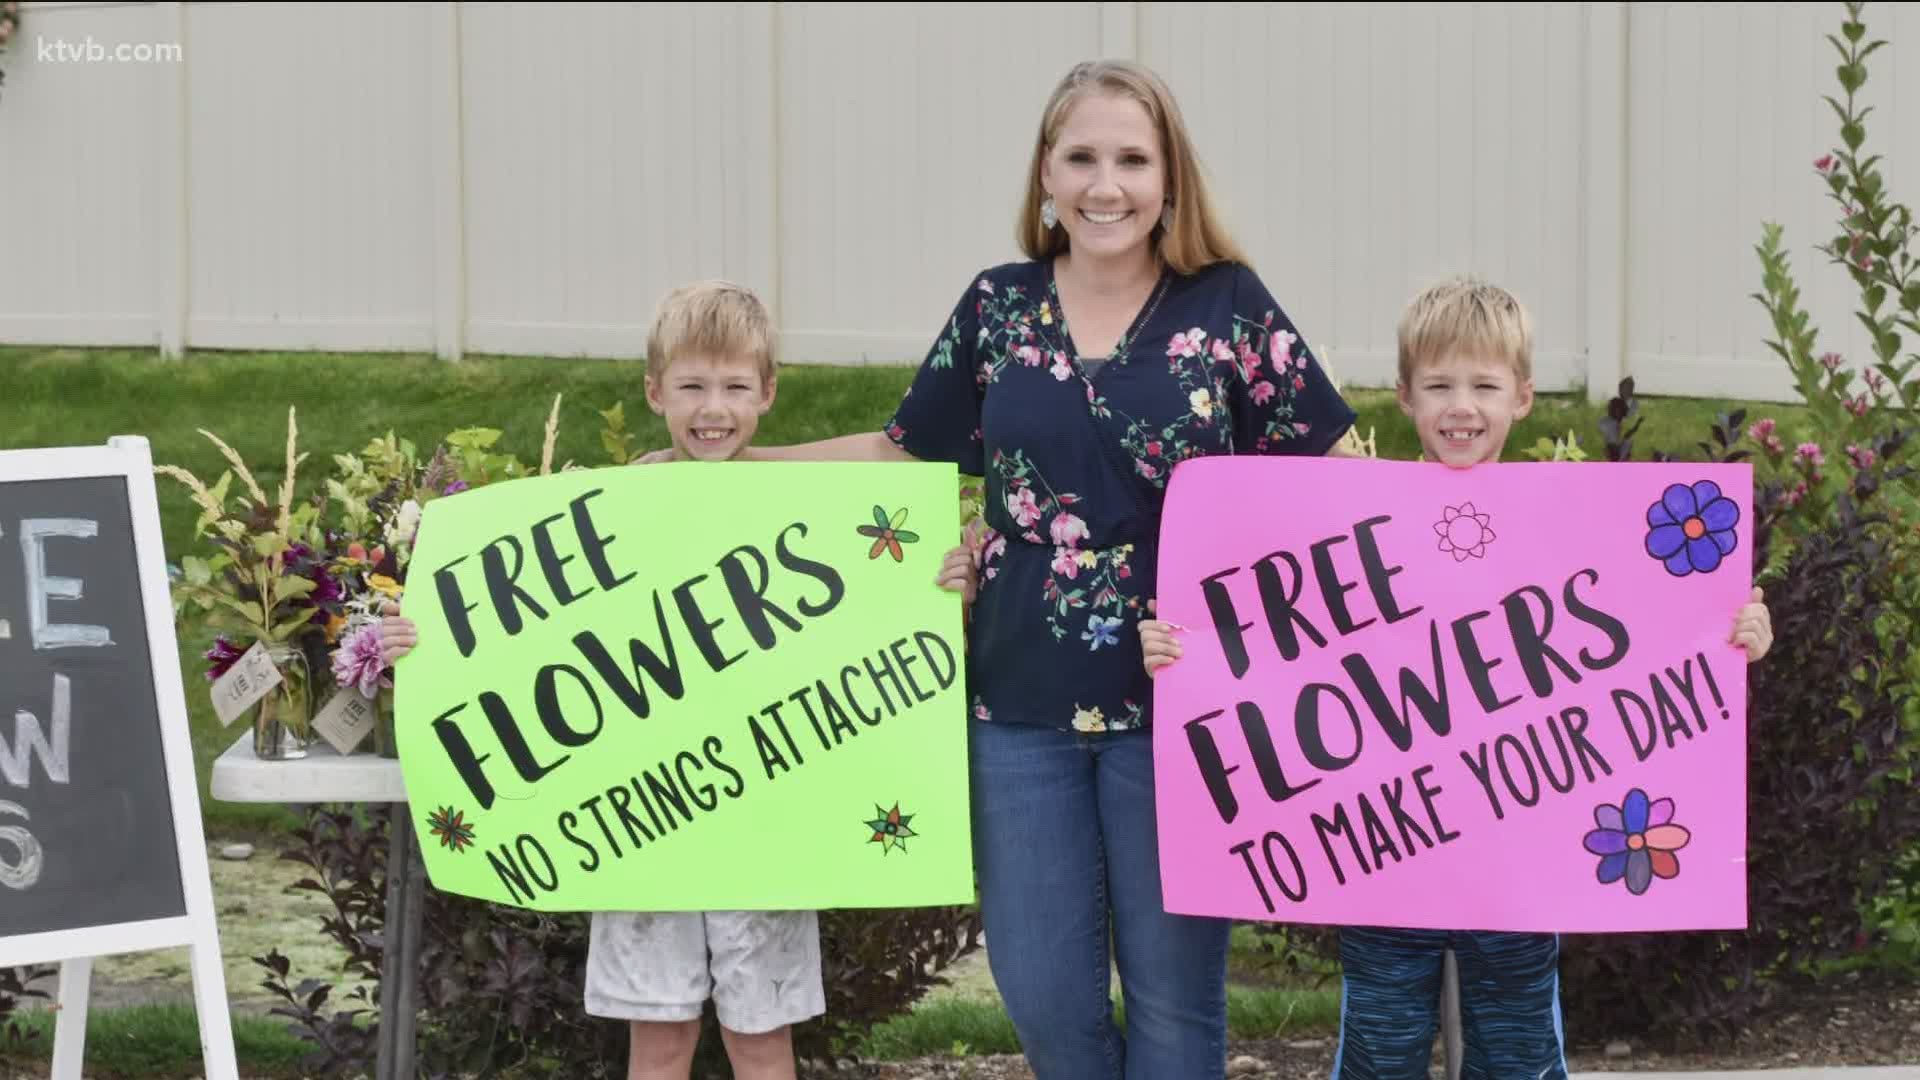 Max and Miles Adams have handed out hundreds of free bouquets to strangers.